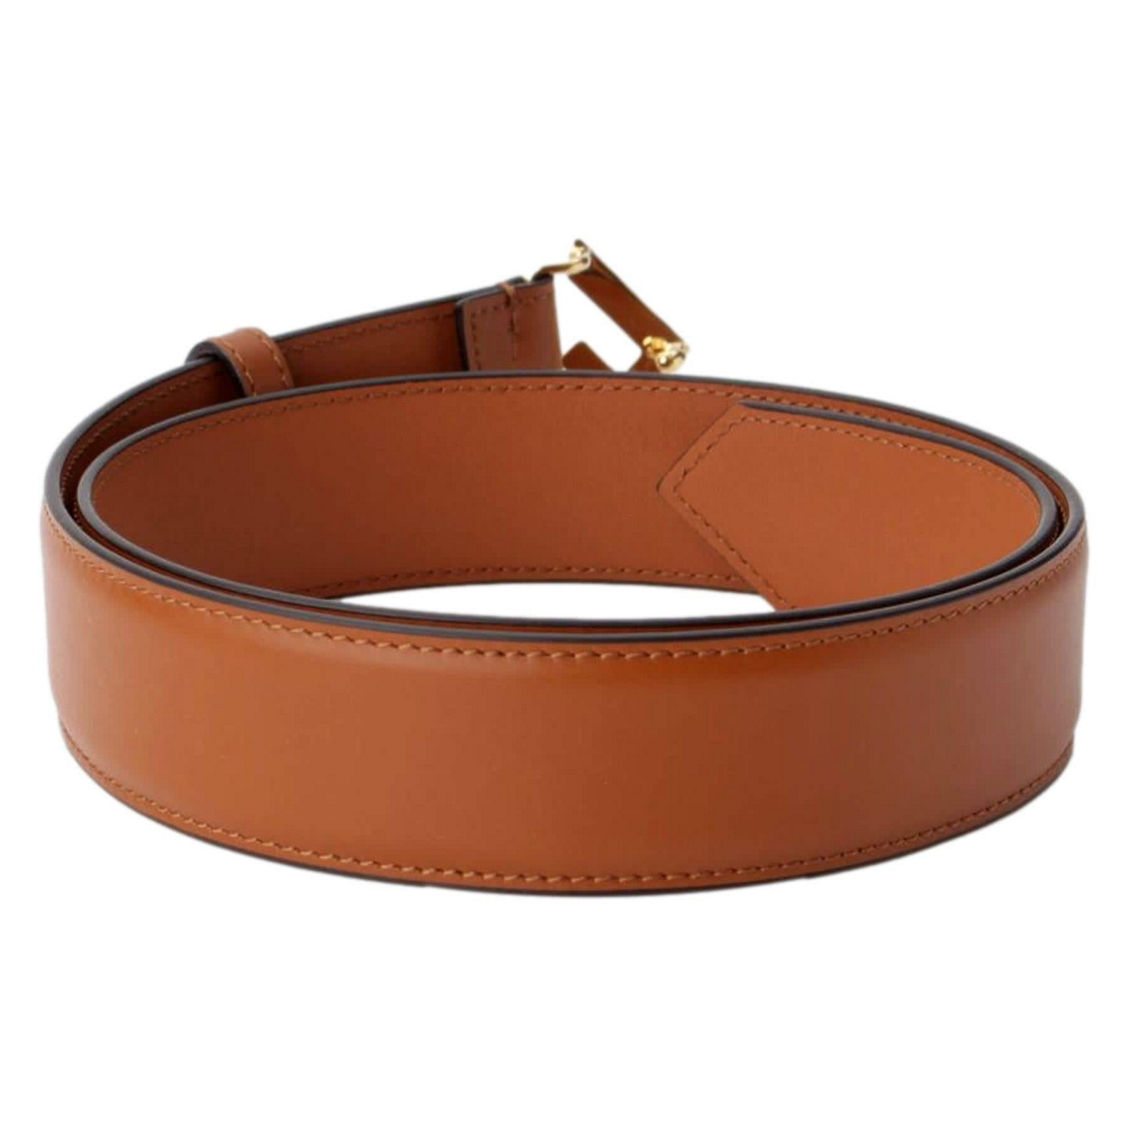 Fendi First Gold Logo Cuoio Brown Calf Leather Belt Size 90 (New) - Image 4 of 5